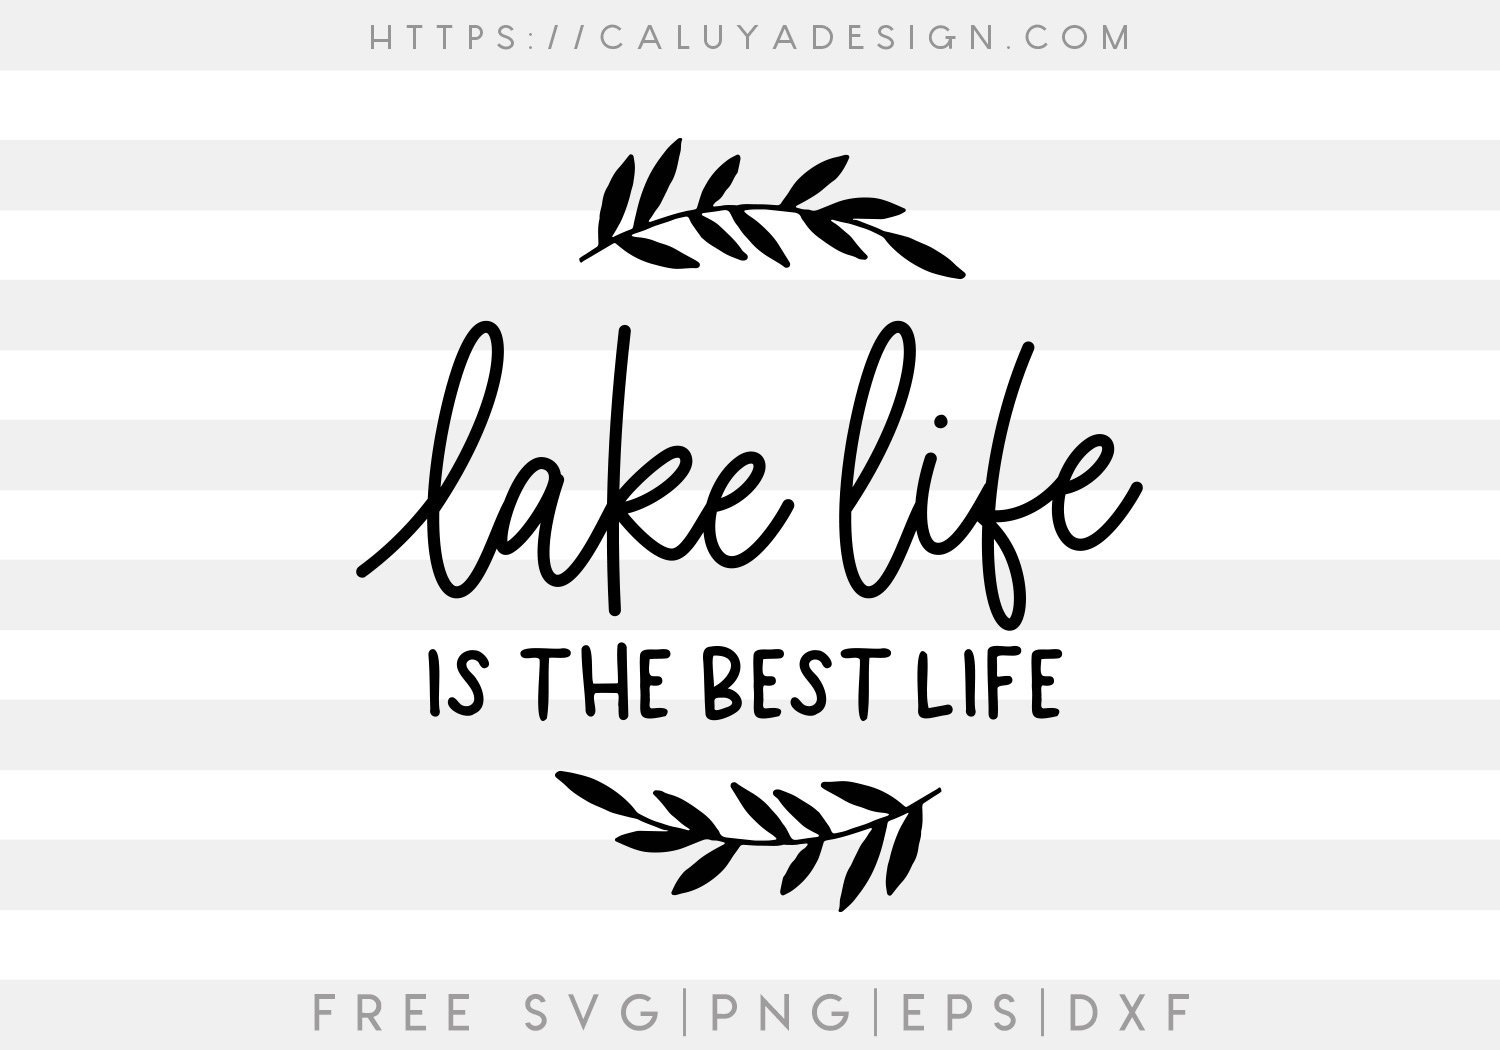 Free Svg Png Download Gallery By Caluya Design